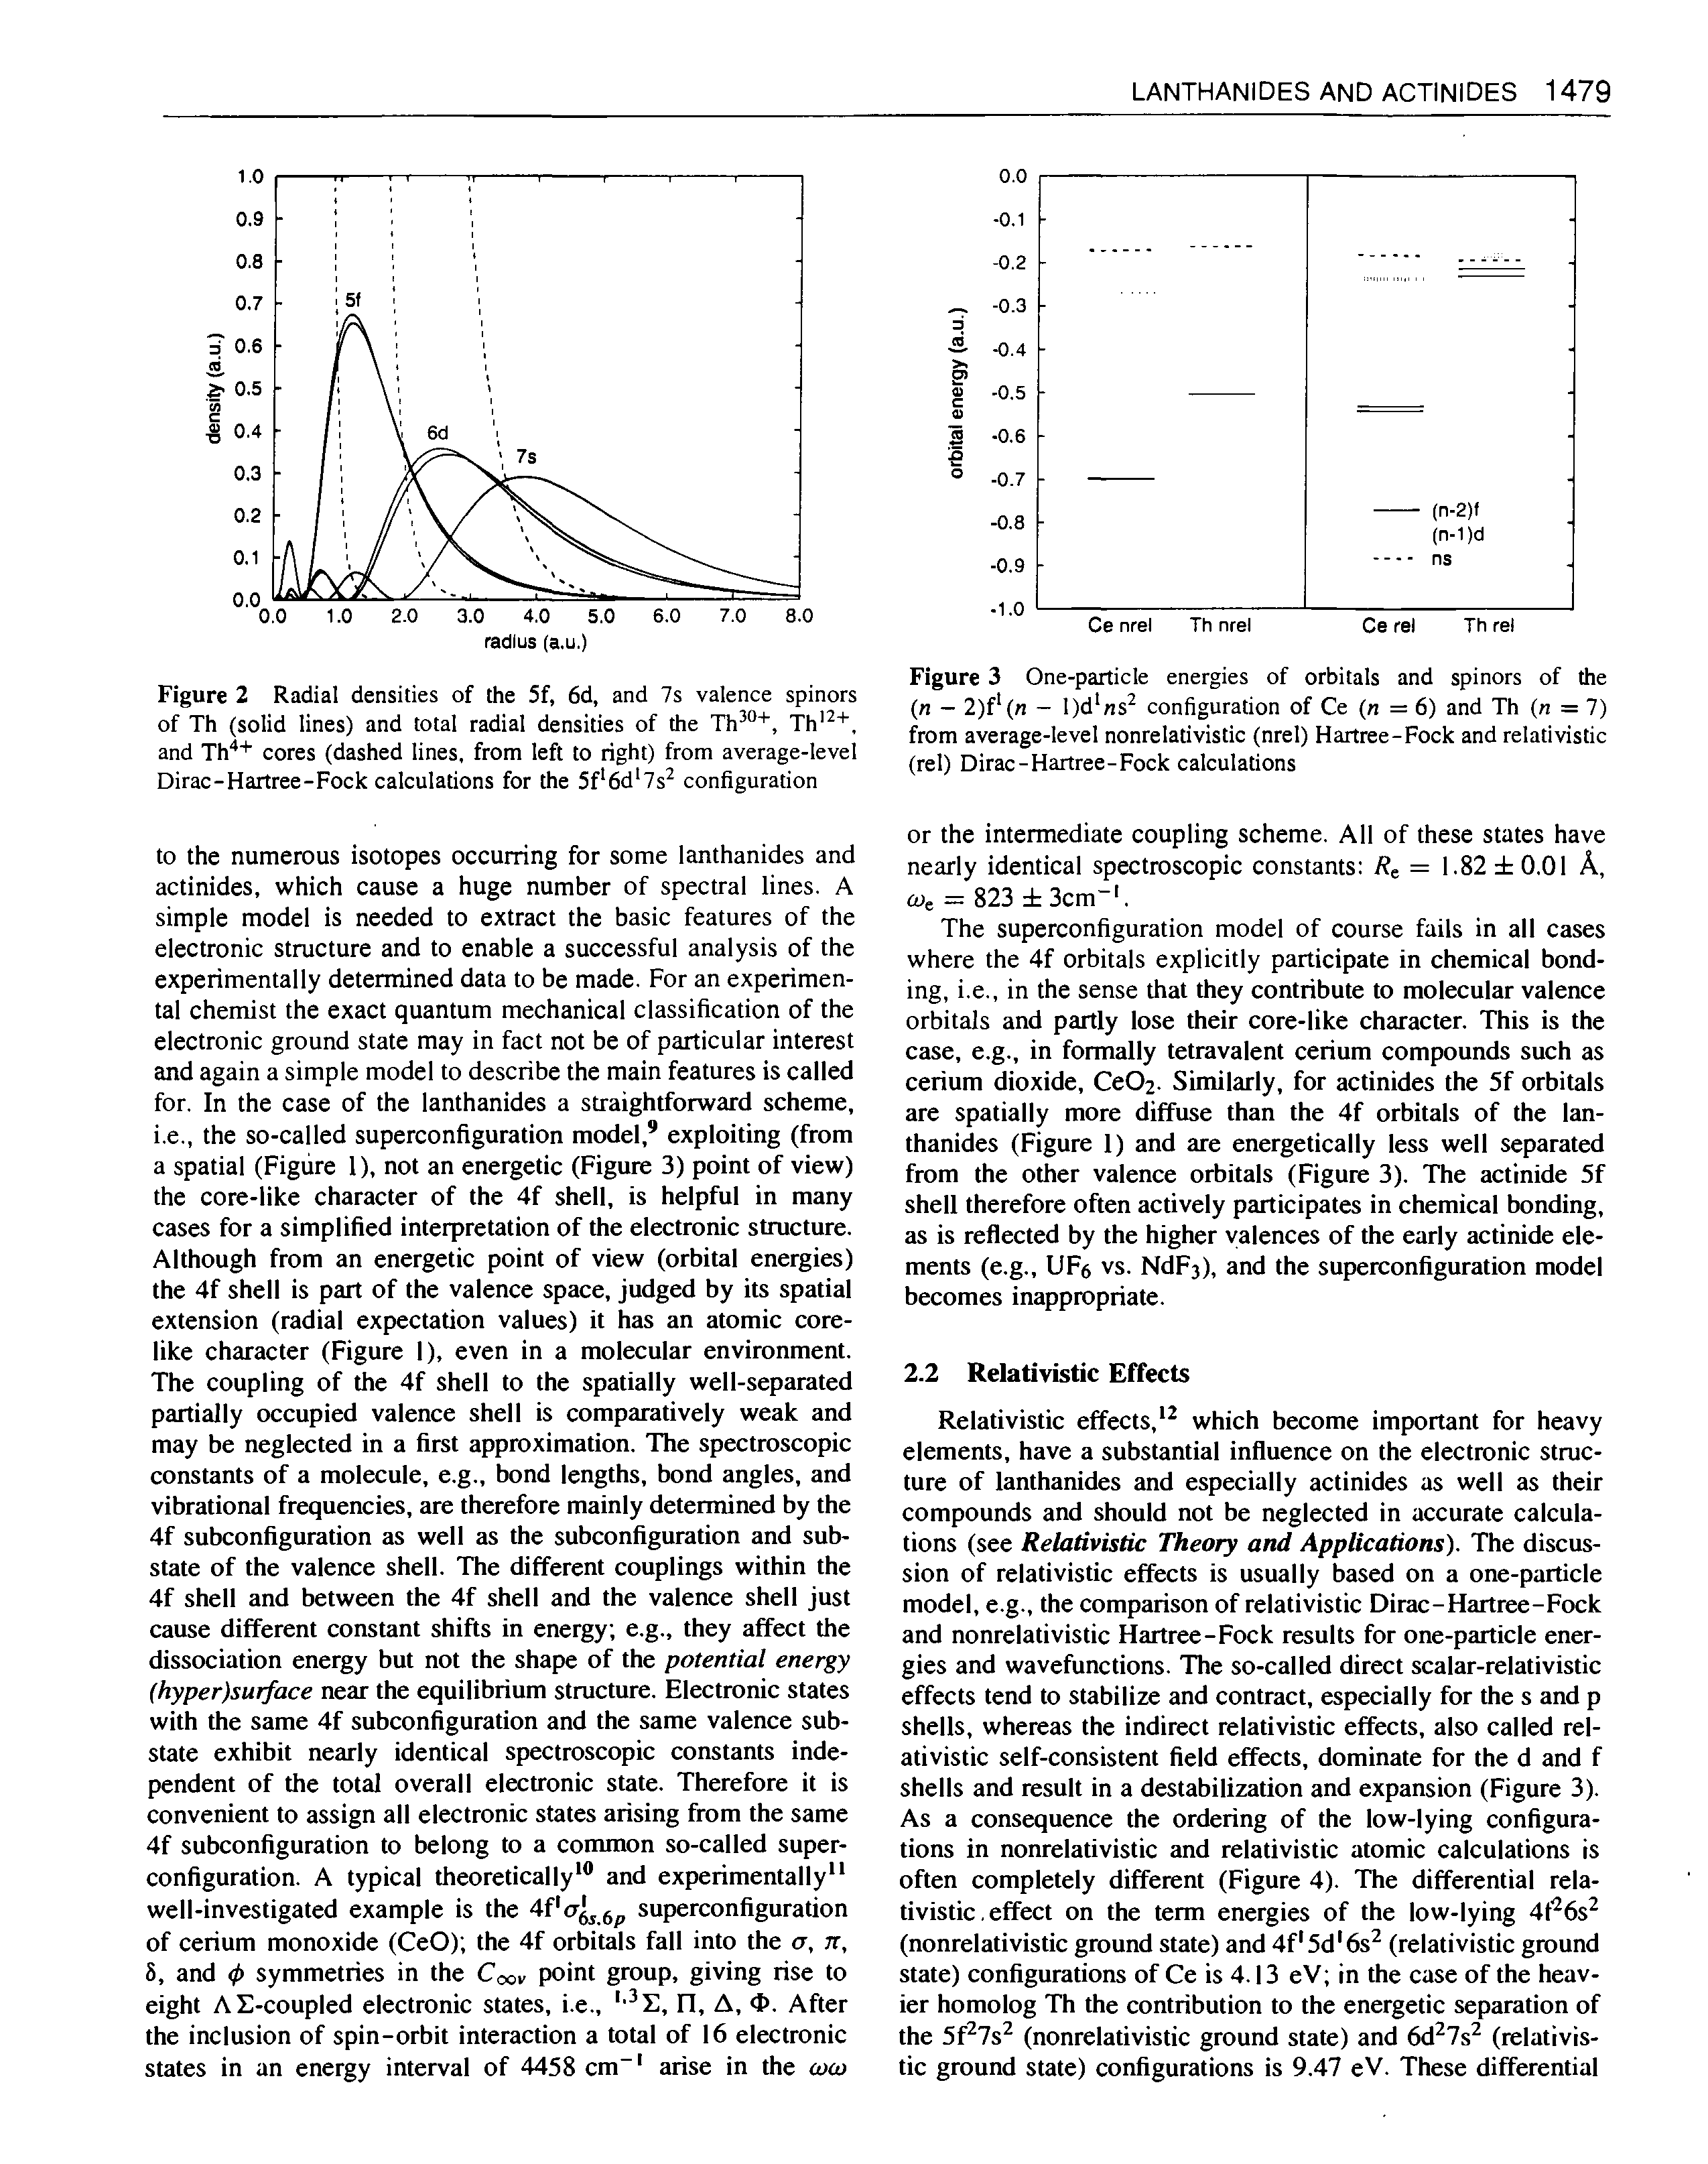 Figure 3 One-particle energies of orbitals and spinors of the (n — 2)f (n - I)d ns configuration of Ce (n = 6) and Th (n = 7) from average-level nonrelativistic (nrel) Hartree-Fock and relativistic (rel) Dirac-Hartree-Fock calculations...